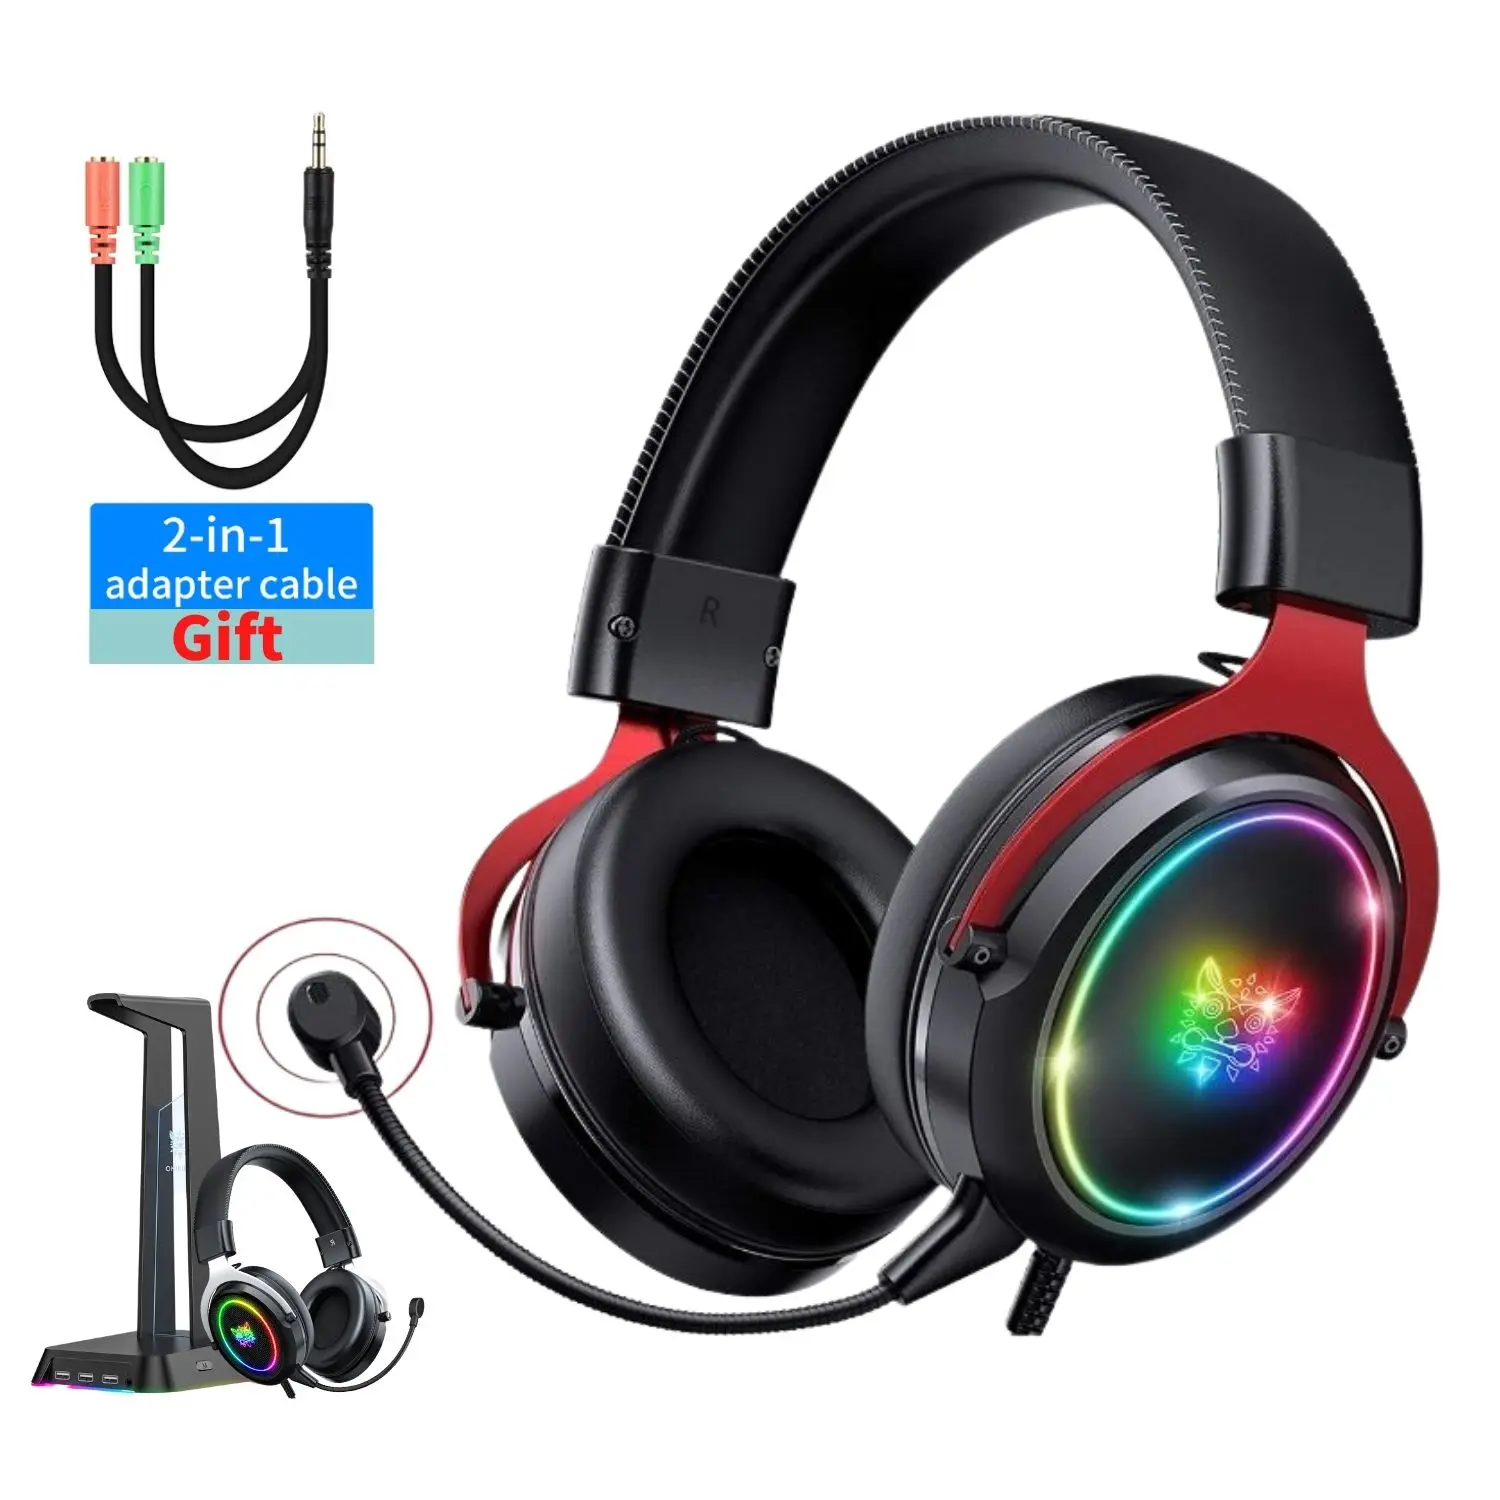 

Onikuma x10 RGB Headset Gamer Wired Headphones With Mic PC Earphones Stereo 7.1 Surround Sound For PS4 PS5 casque Xbox one Games